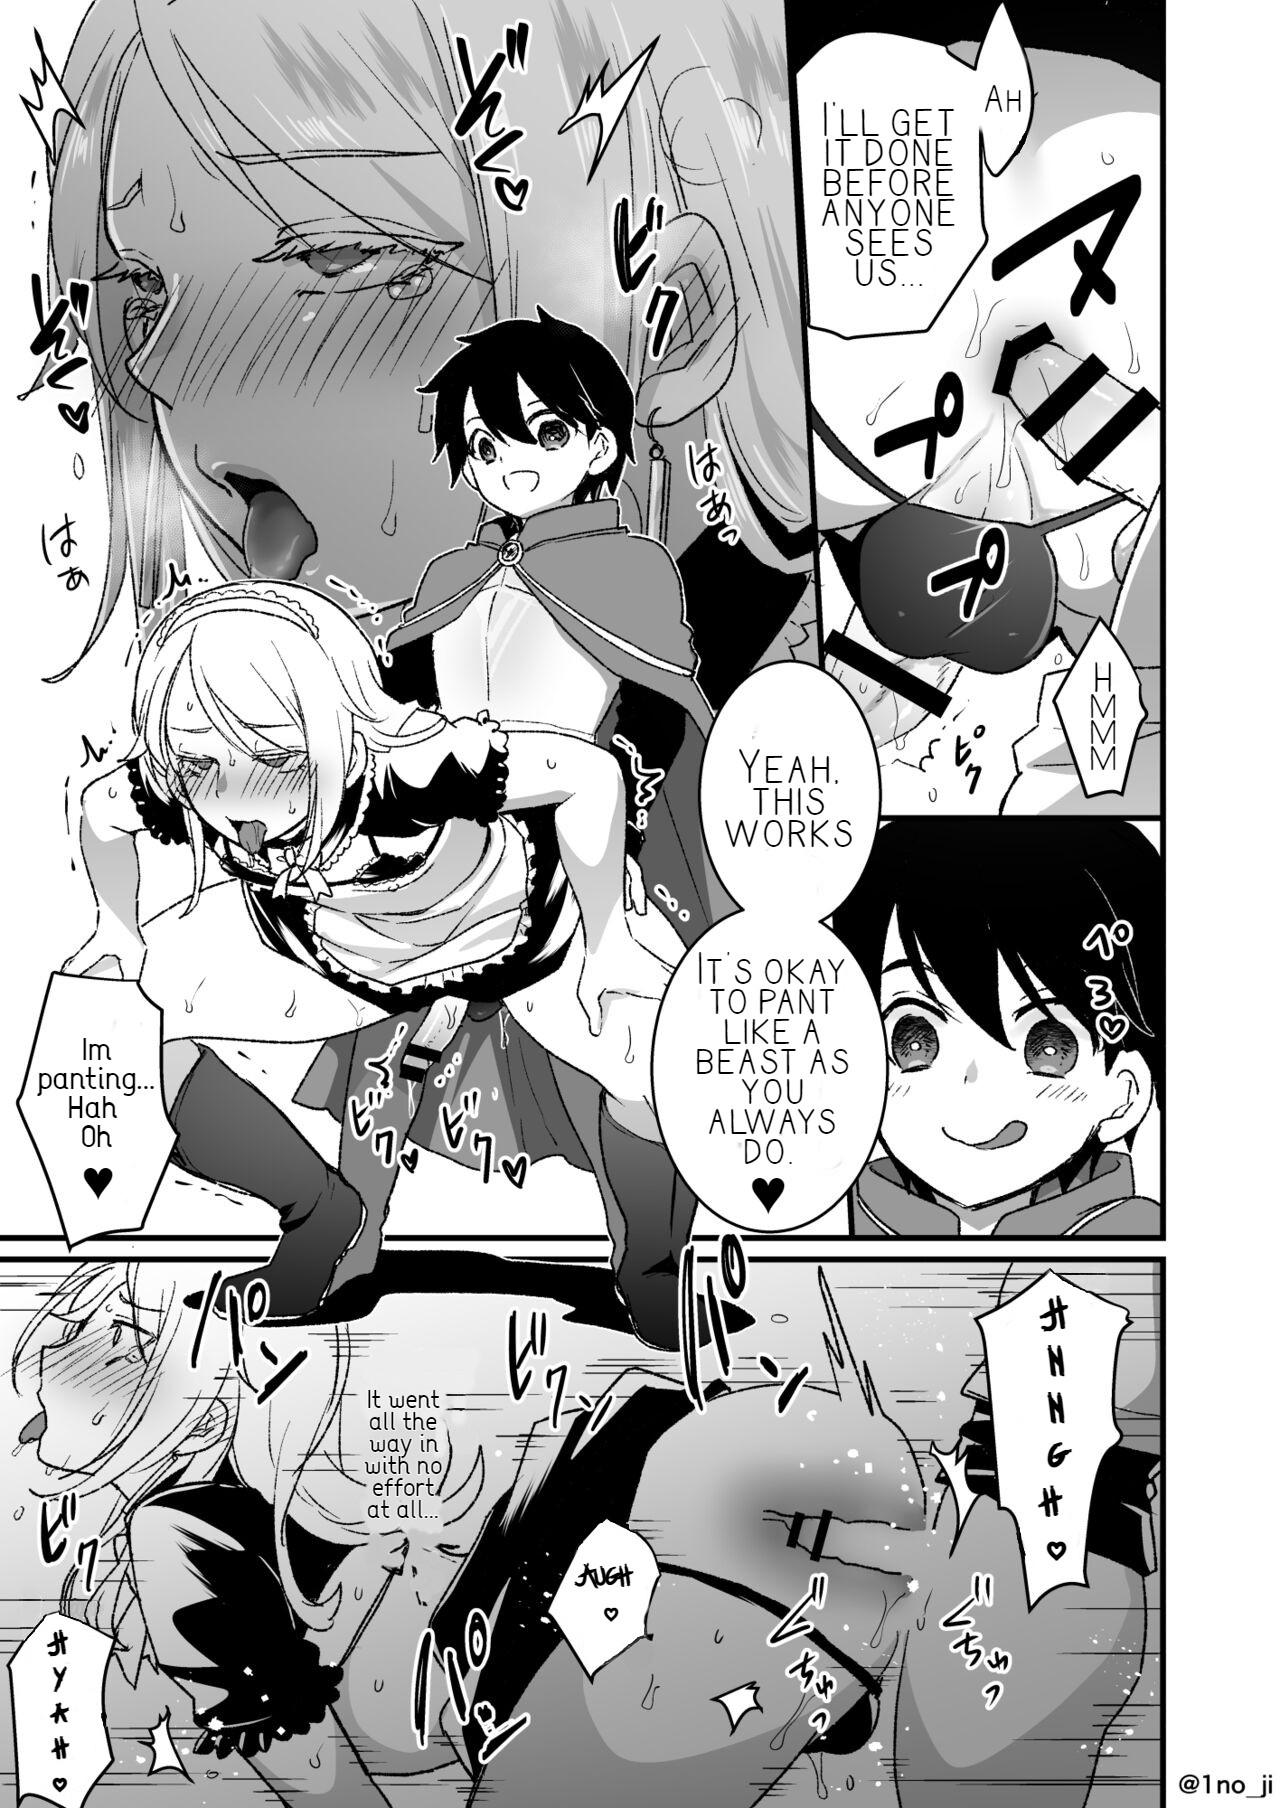 Manga of the Strongest Shota and the Strong and Beautiful Onii-san 2 3